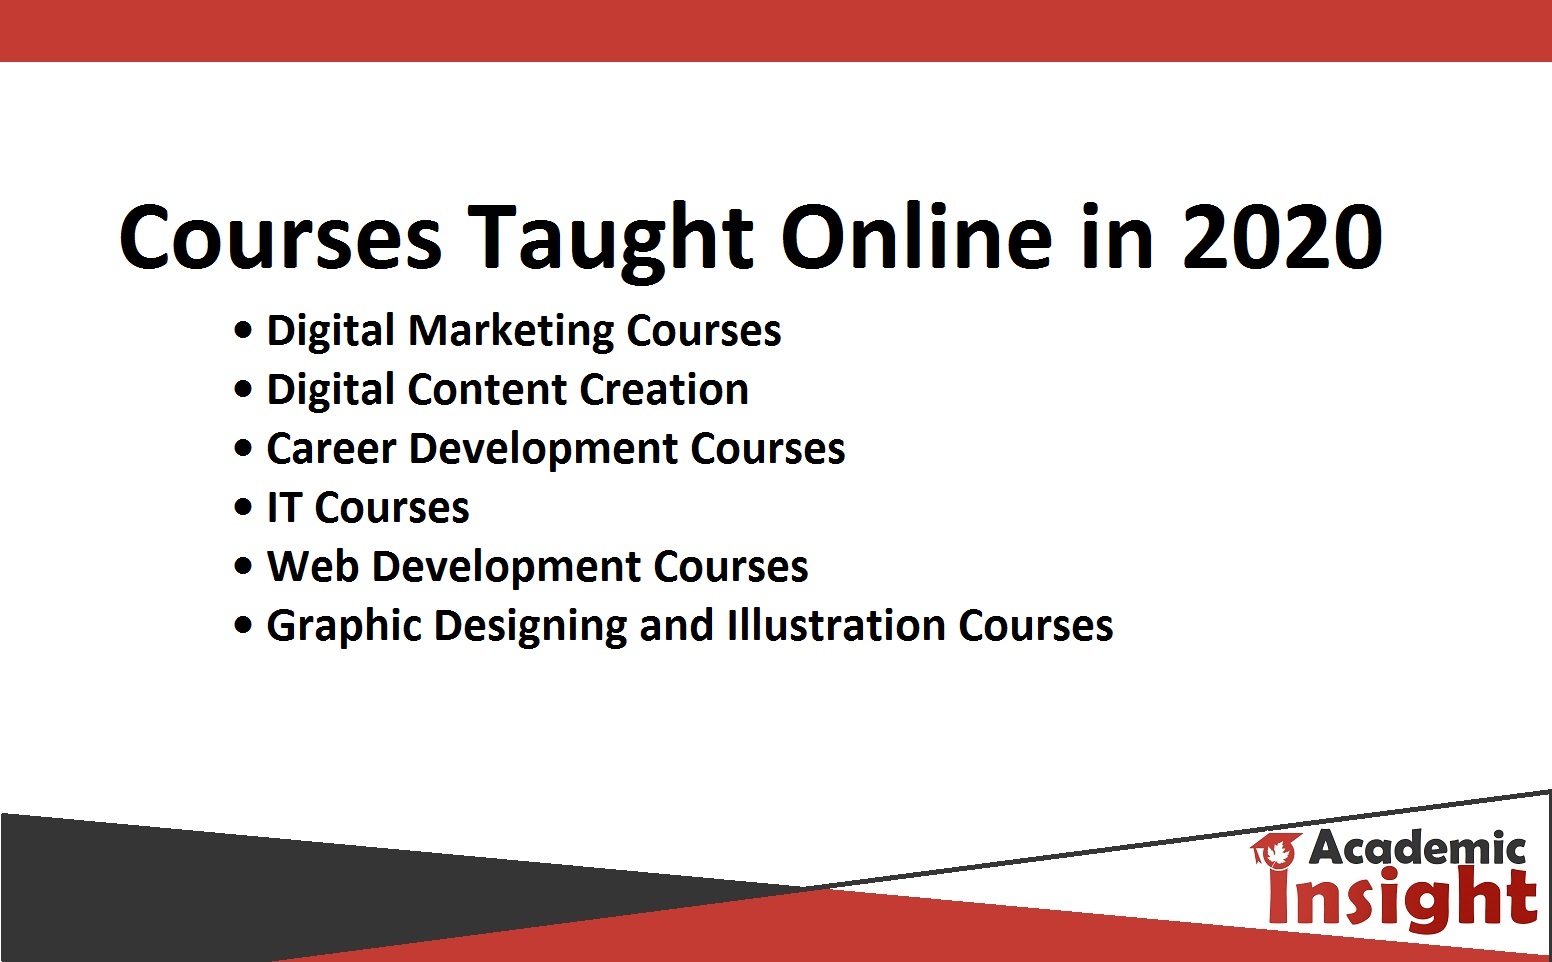 Top Courses Taught Online in 2020: An Analysis of Academic Insight